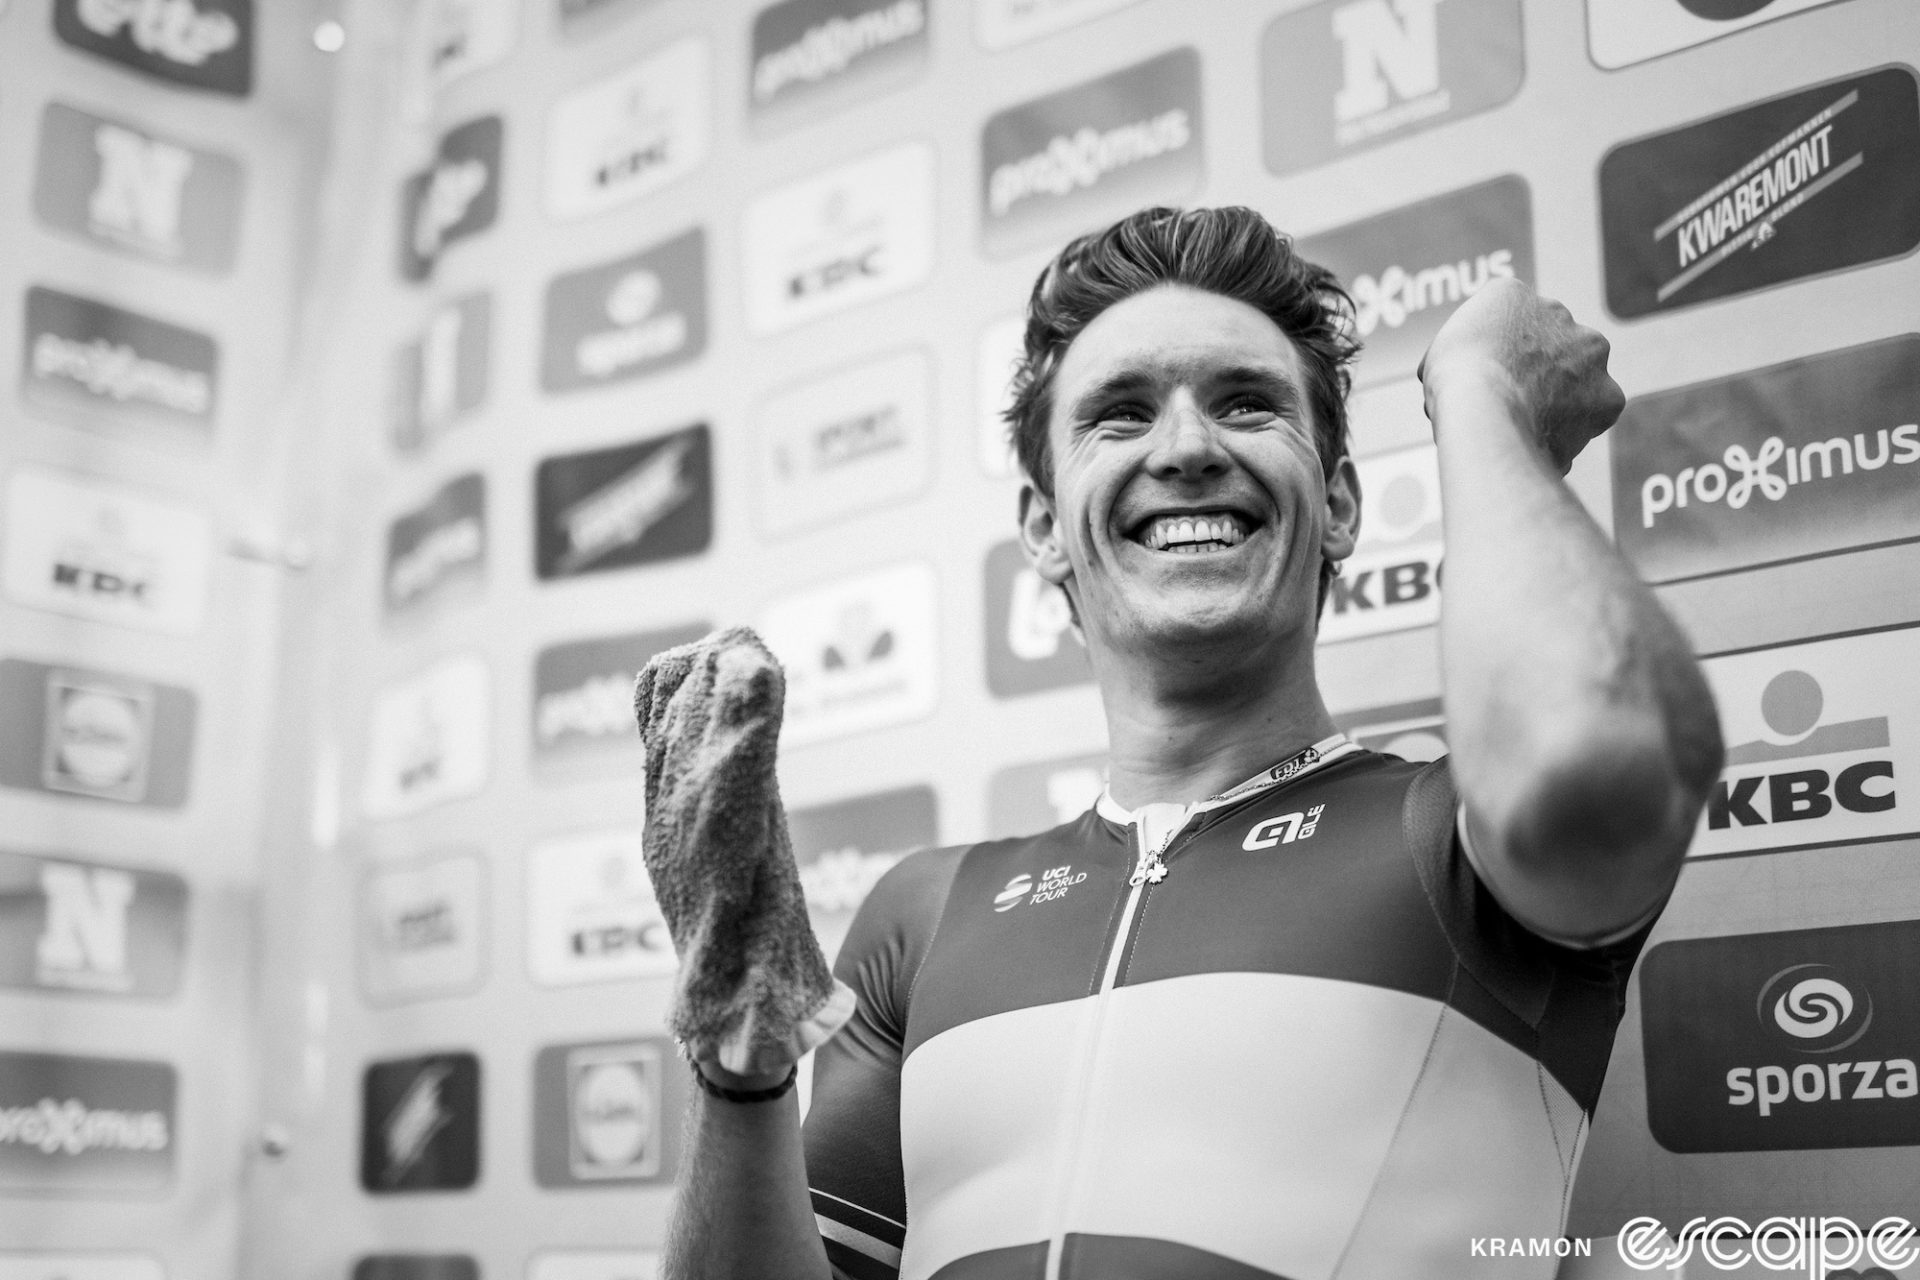 Arnaud Demare smiles in the winner's press conference at the Brussels Cycling Classic. The black-and-white photo still shows the unmistakeable tricolore jersey of French national champion, and the only thing more breathtaking than Arnaud's smile is his swept-back hair, which looks impossibly good for a guy who just did a five-hour bike race.